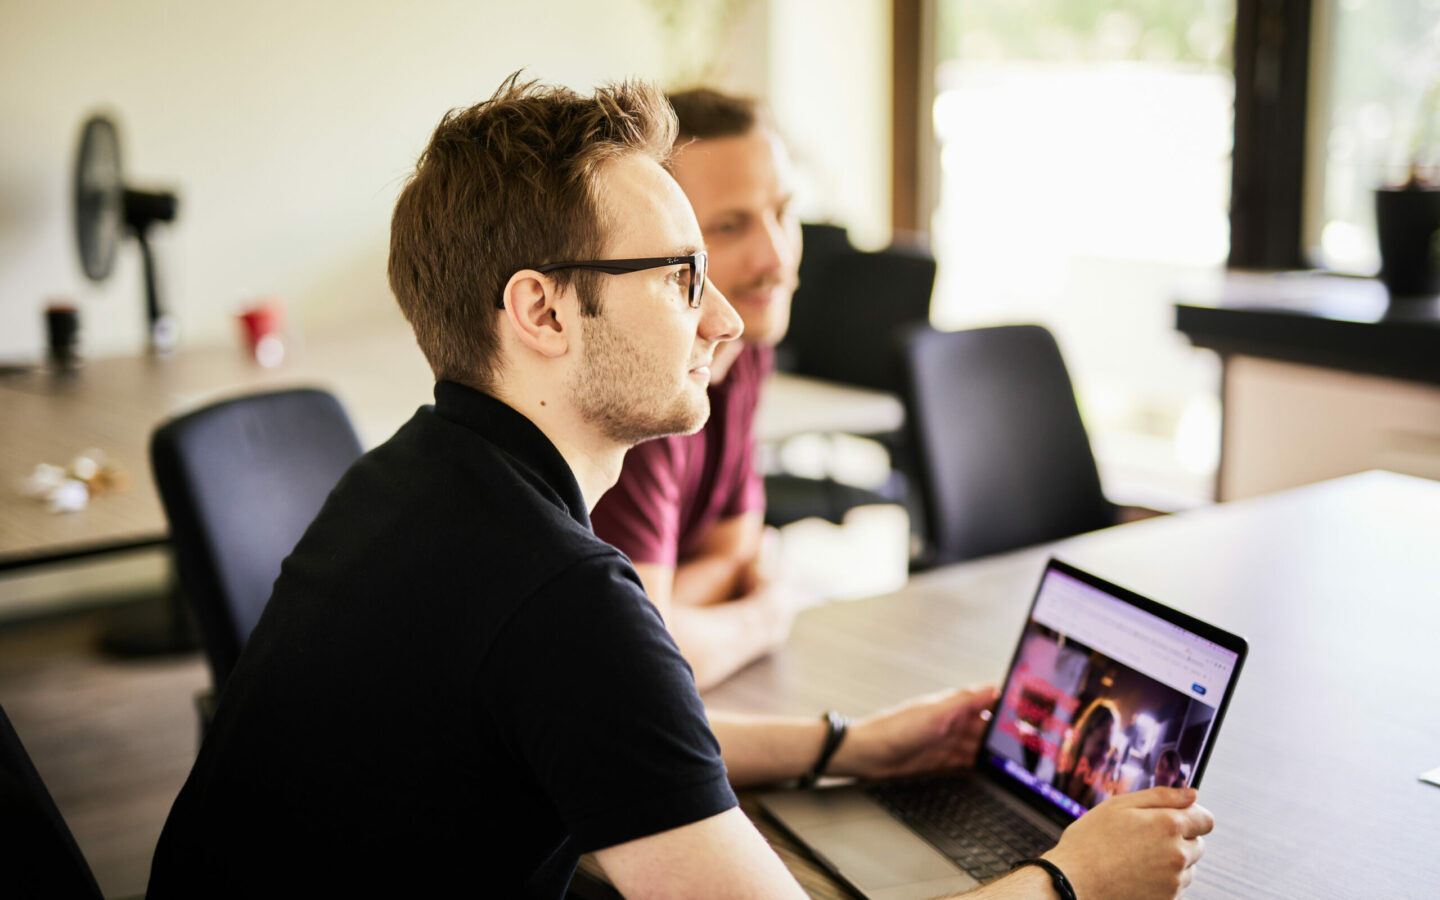 Photo of a young man with glasses sitting at his laptop and looking at a colleague.